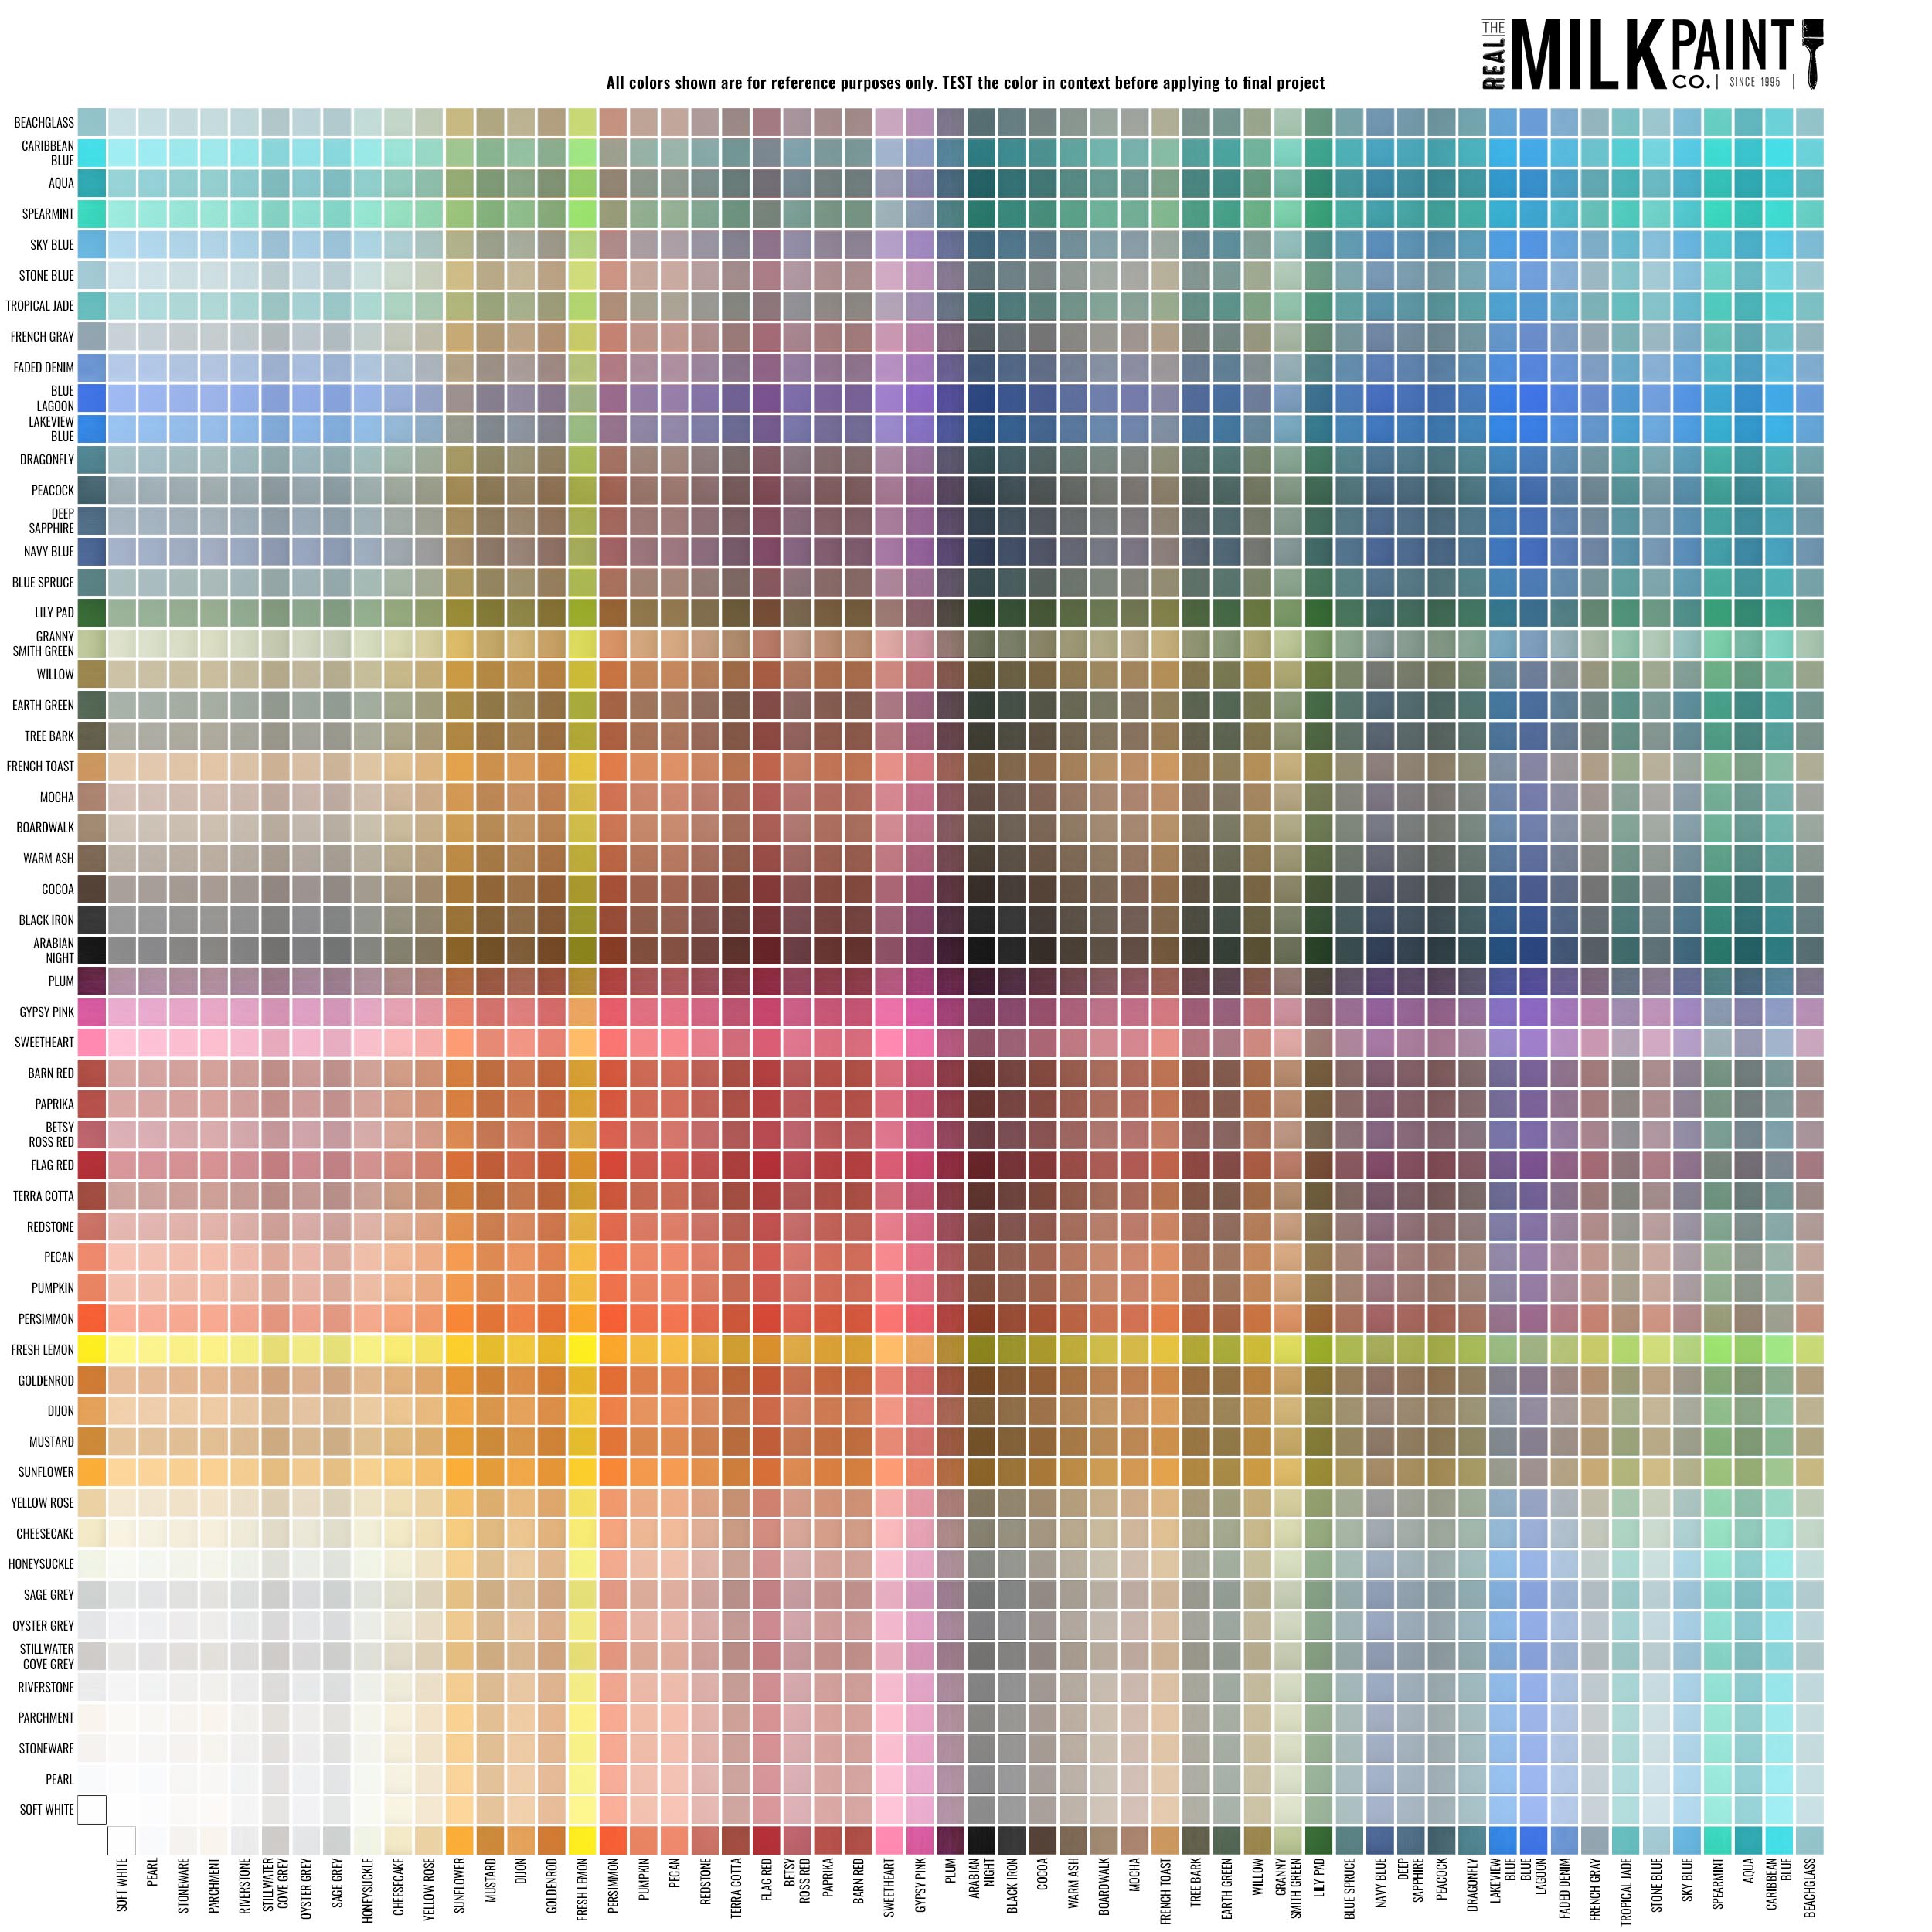 color mixing chart from real milk paint